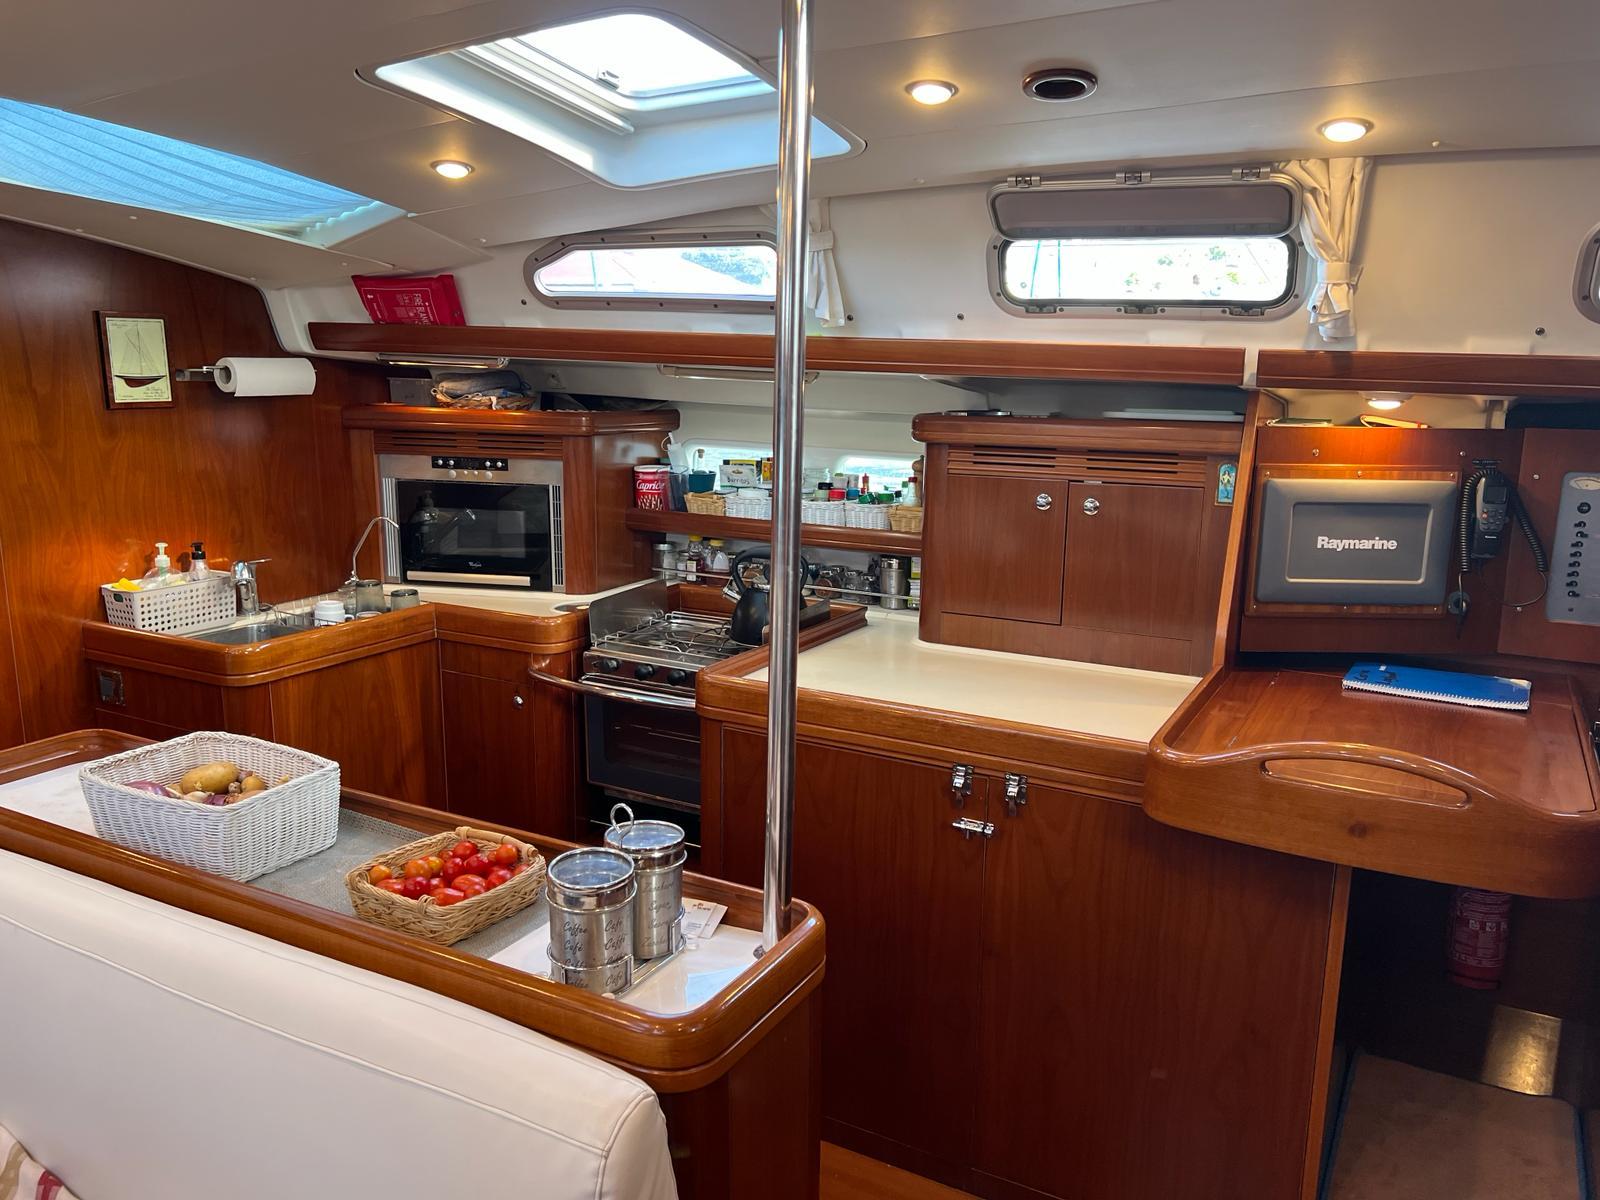 Spacious & Well-Equipped Galley